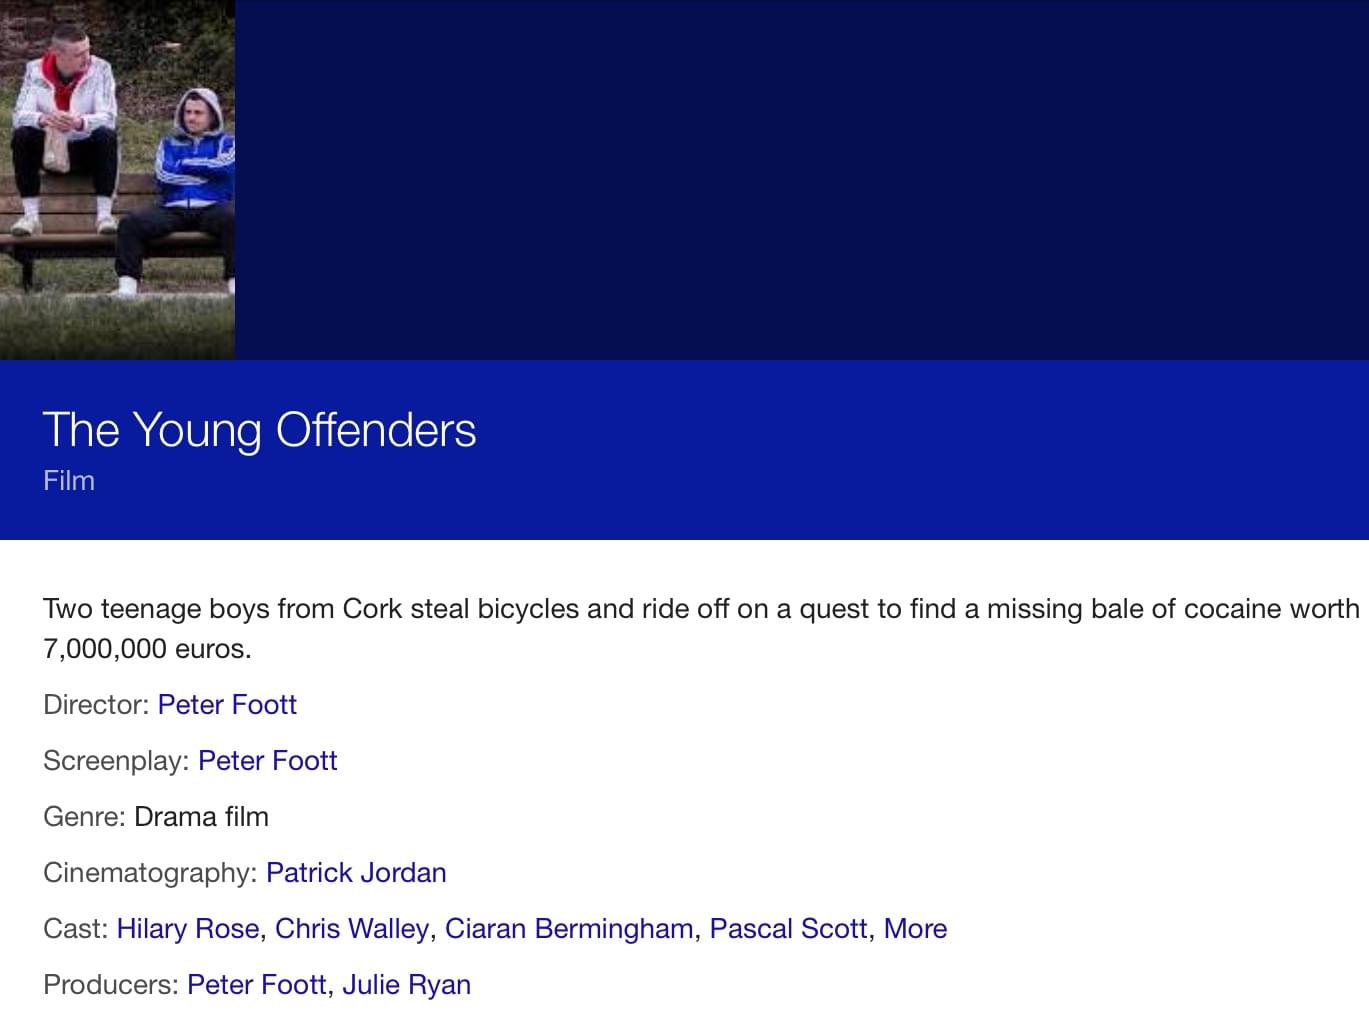 Congratulations to Film graduate Peter Foott on his debut film The Young Offenders